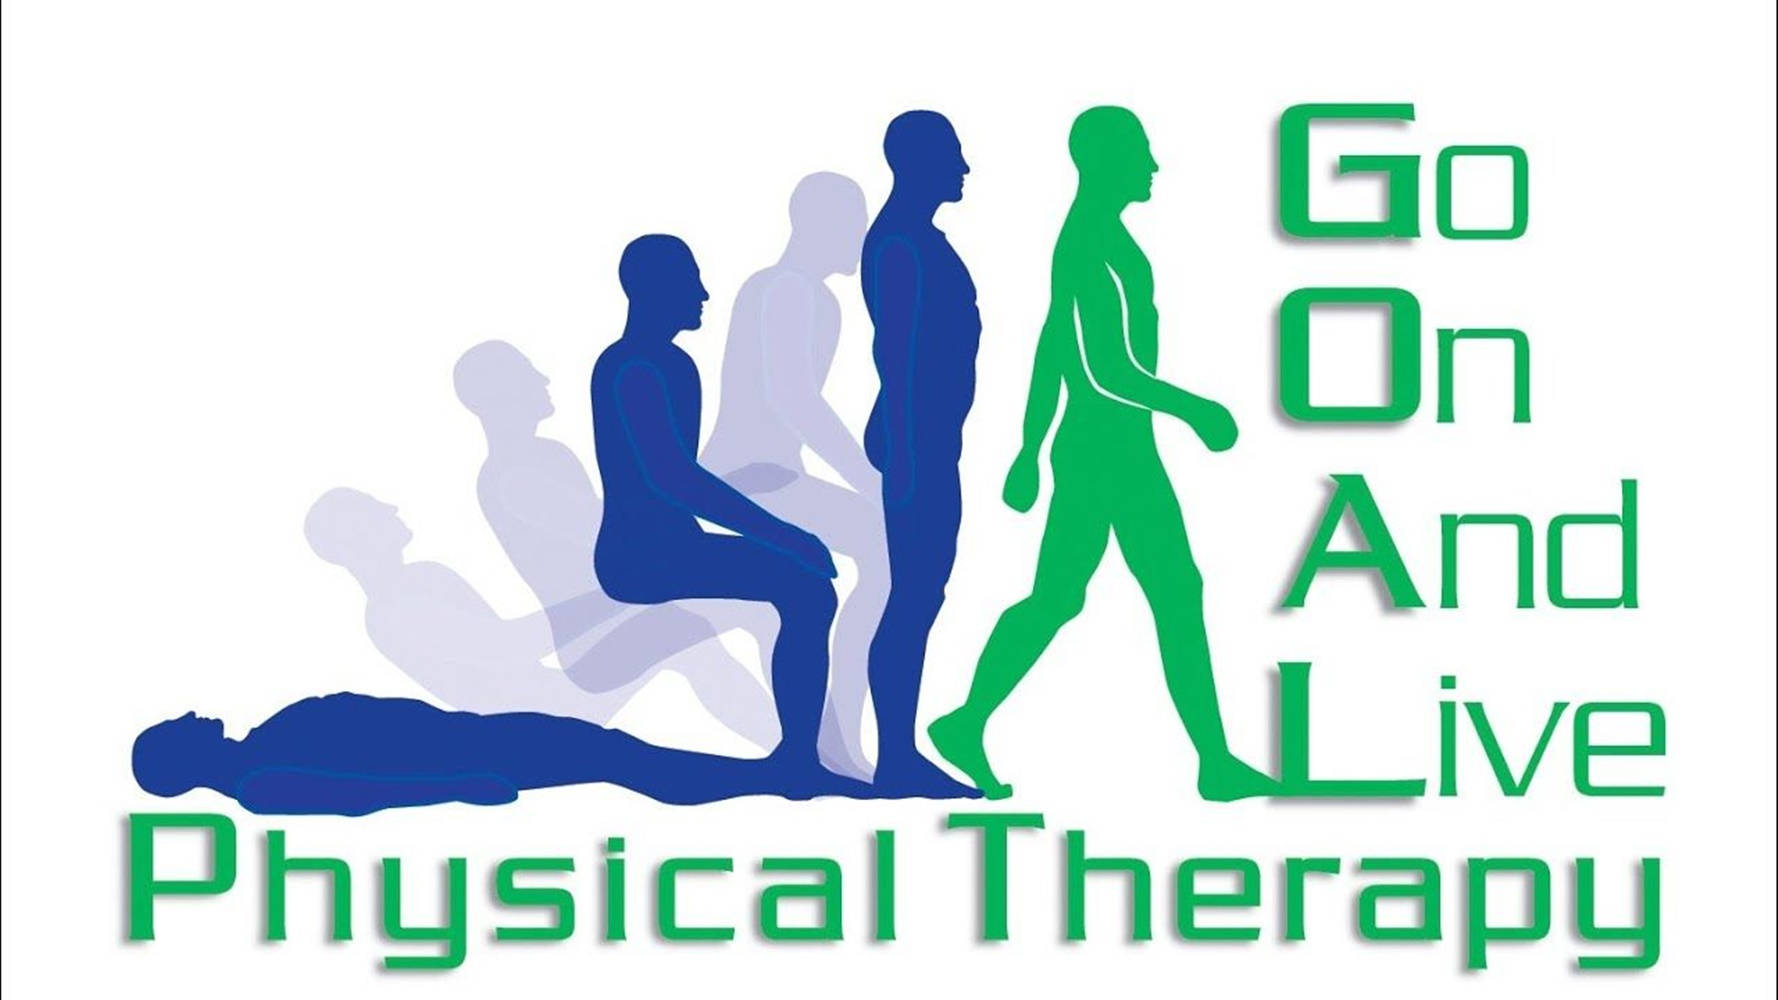 Physical Therapy With Goal Acronym Digital Art Wallpaper